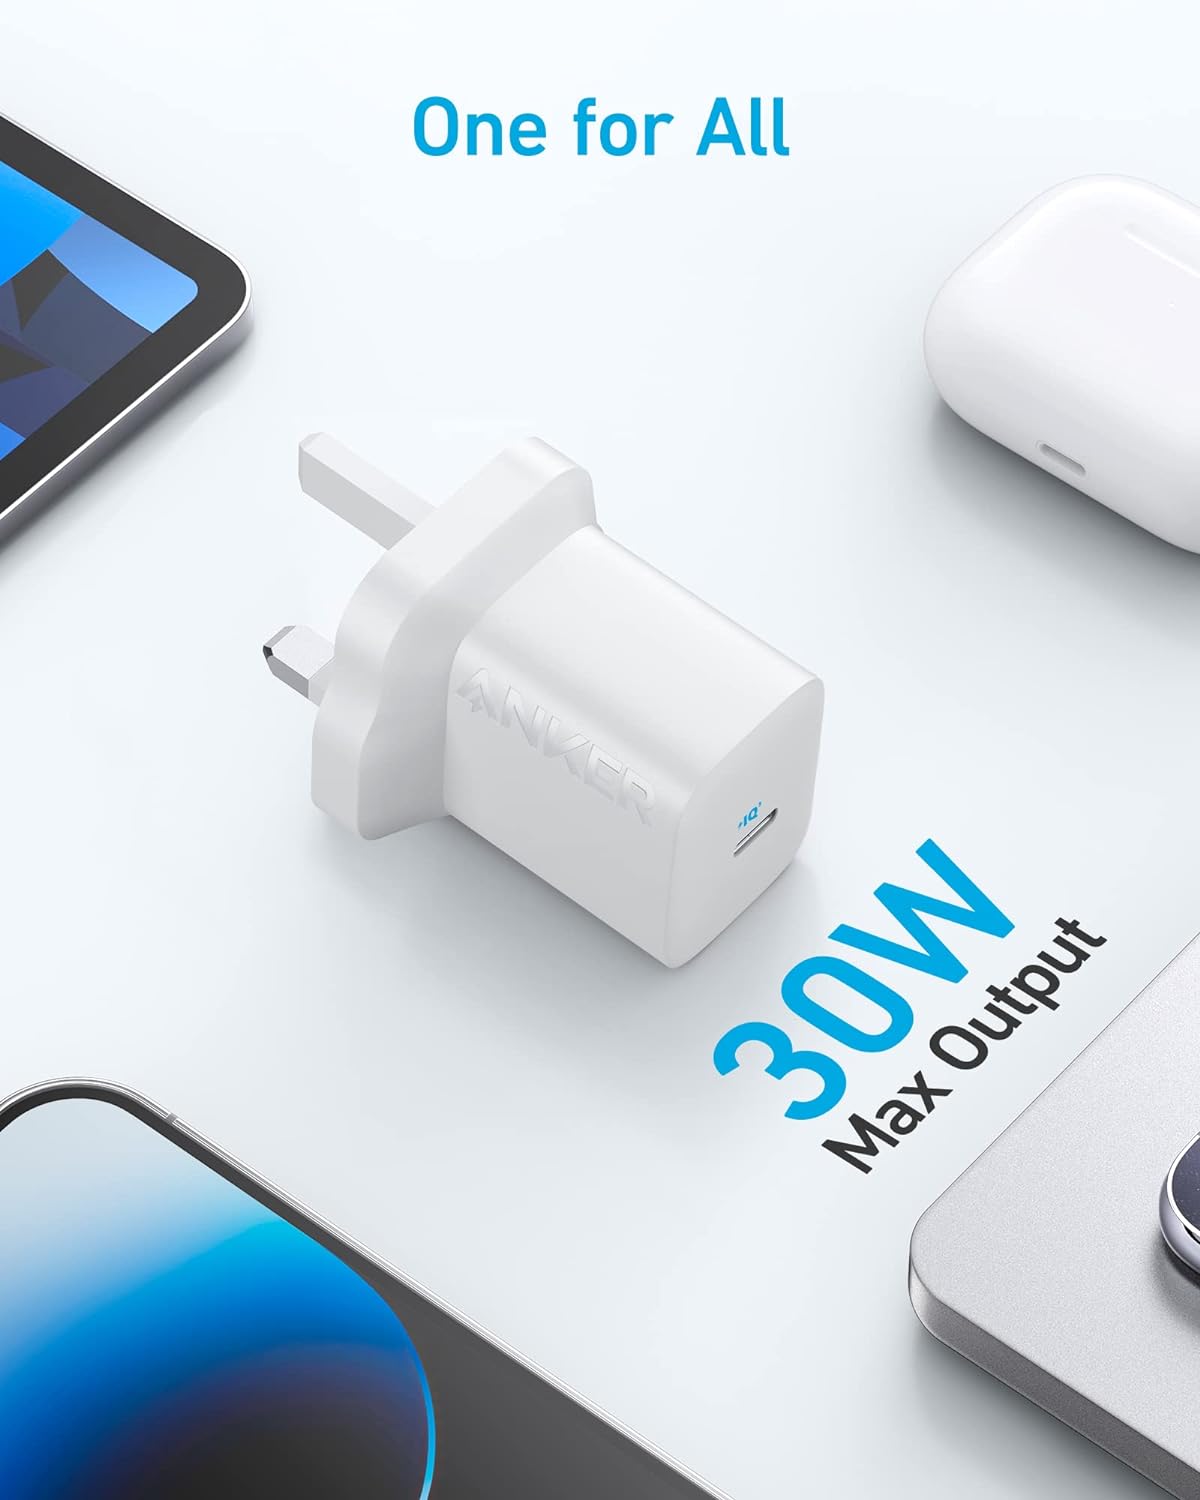 Anker 312 USB C Charger with Compact Design, 30W Fast Charger - White